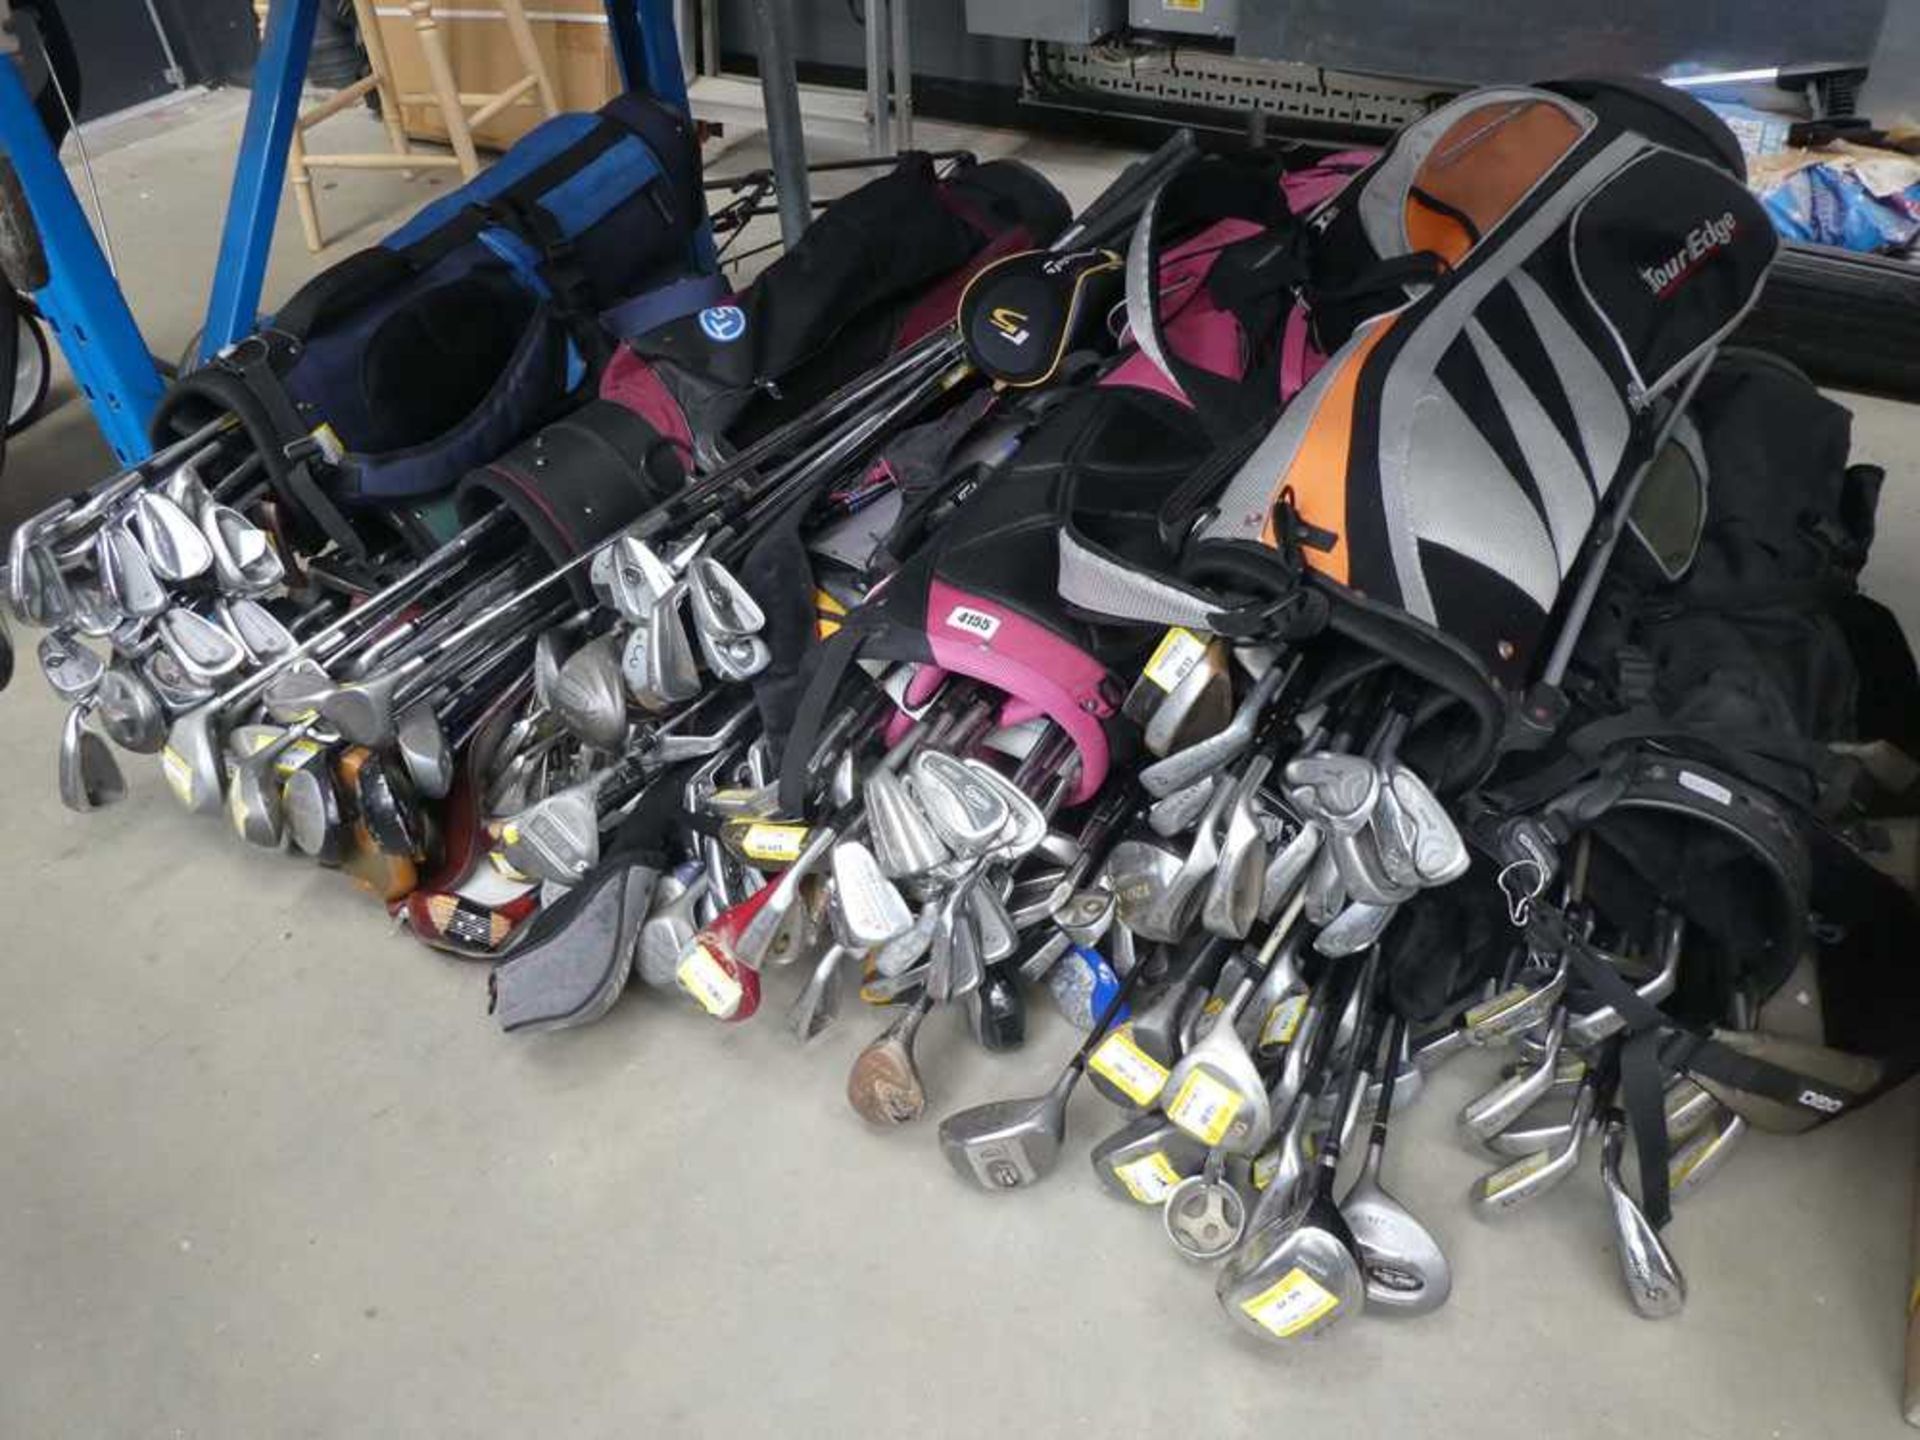 Half an under bay of assorted golf bags and golf clubs